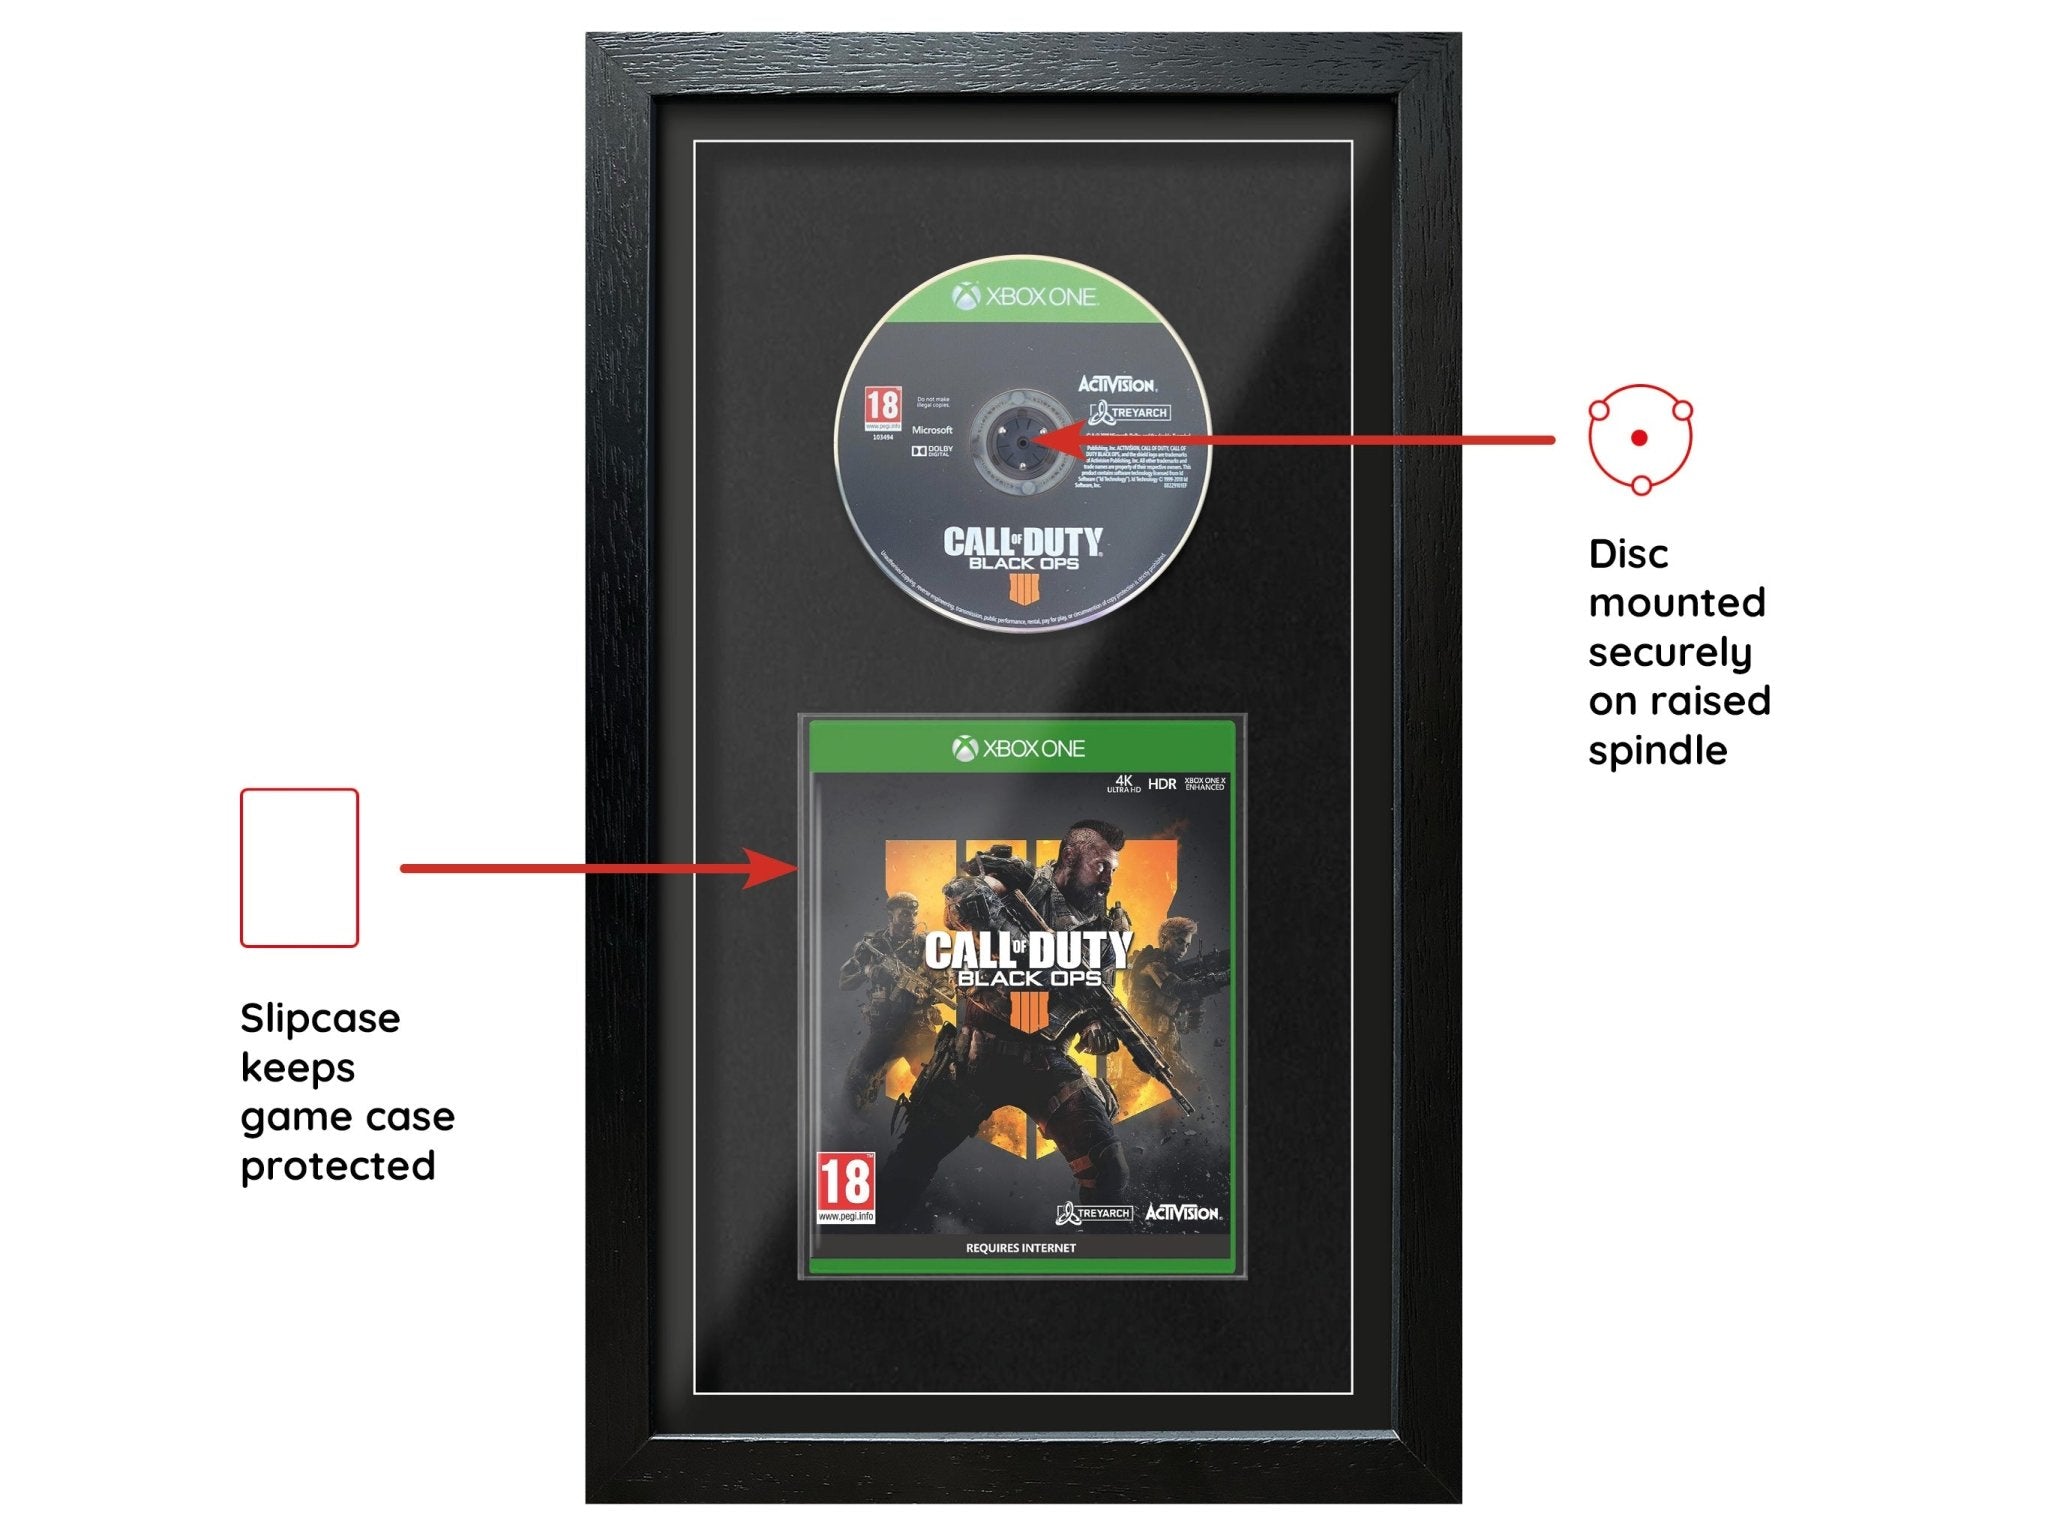 Call of Duty: Black Ops IIII (Xbox One) Exhibition Range Framed Game - Frame-A-Game